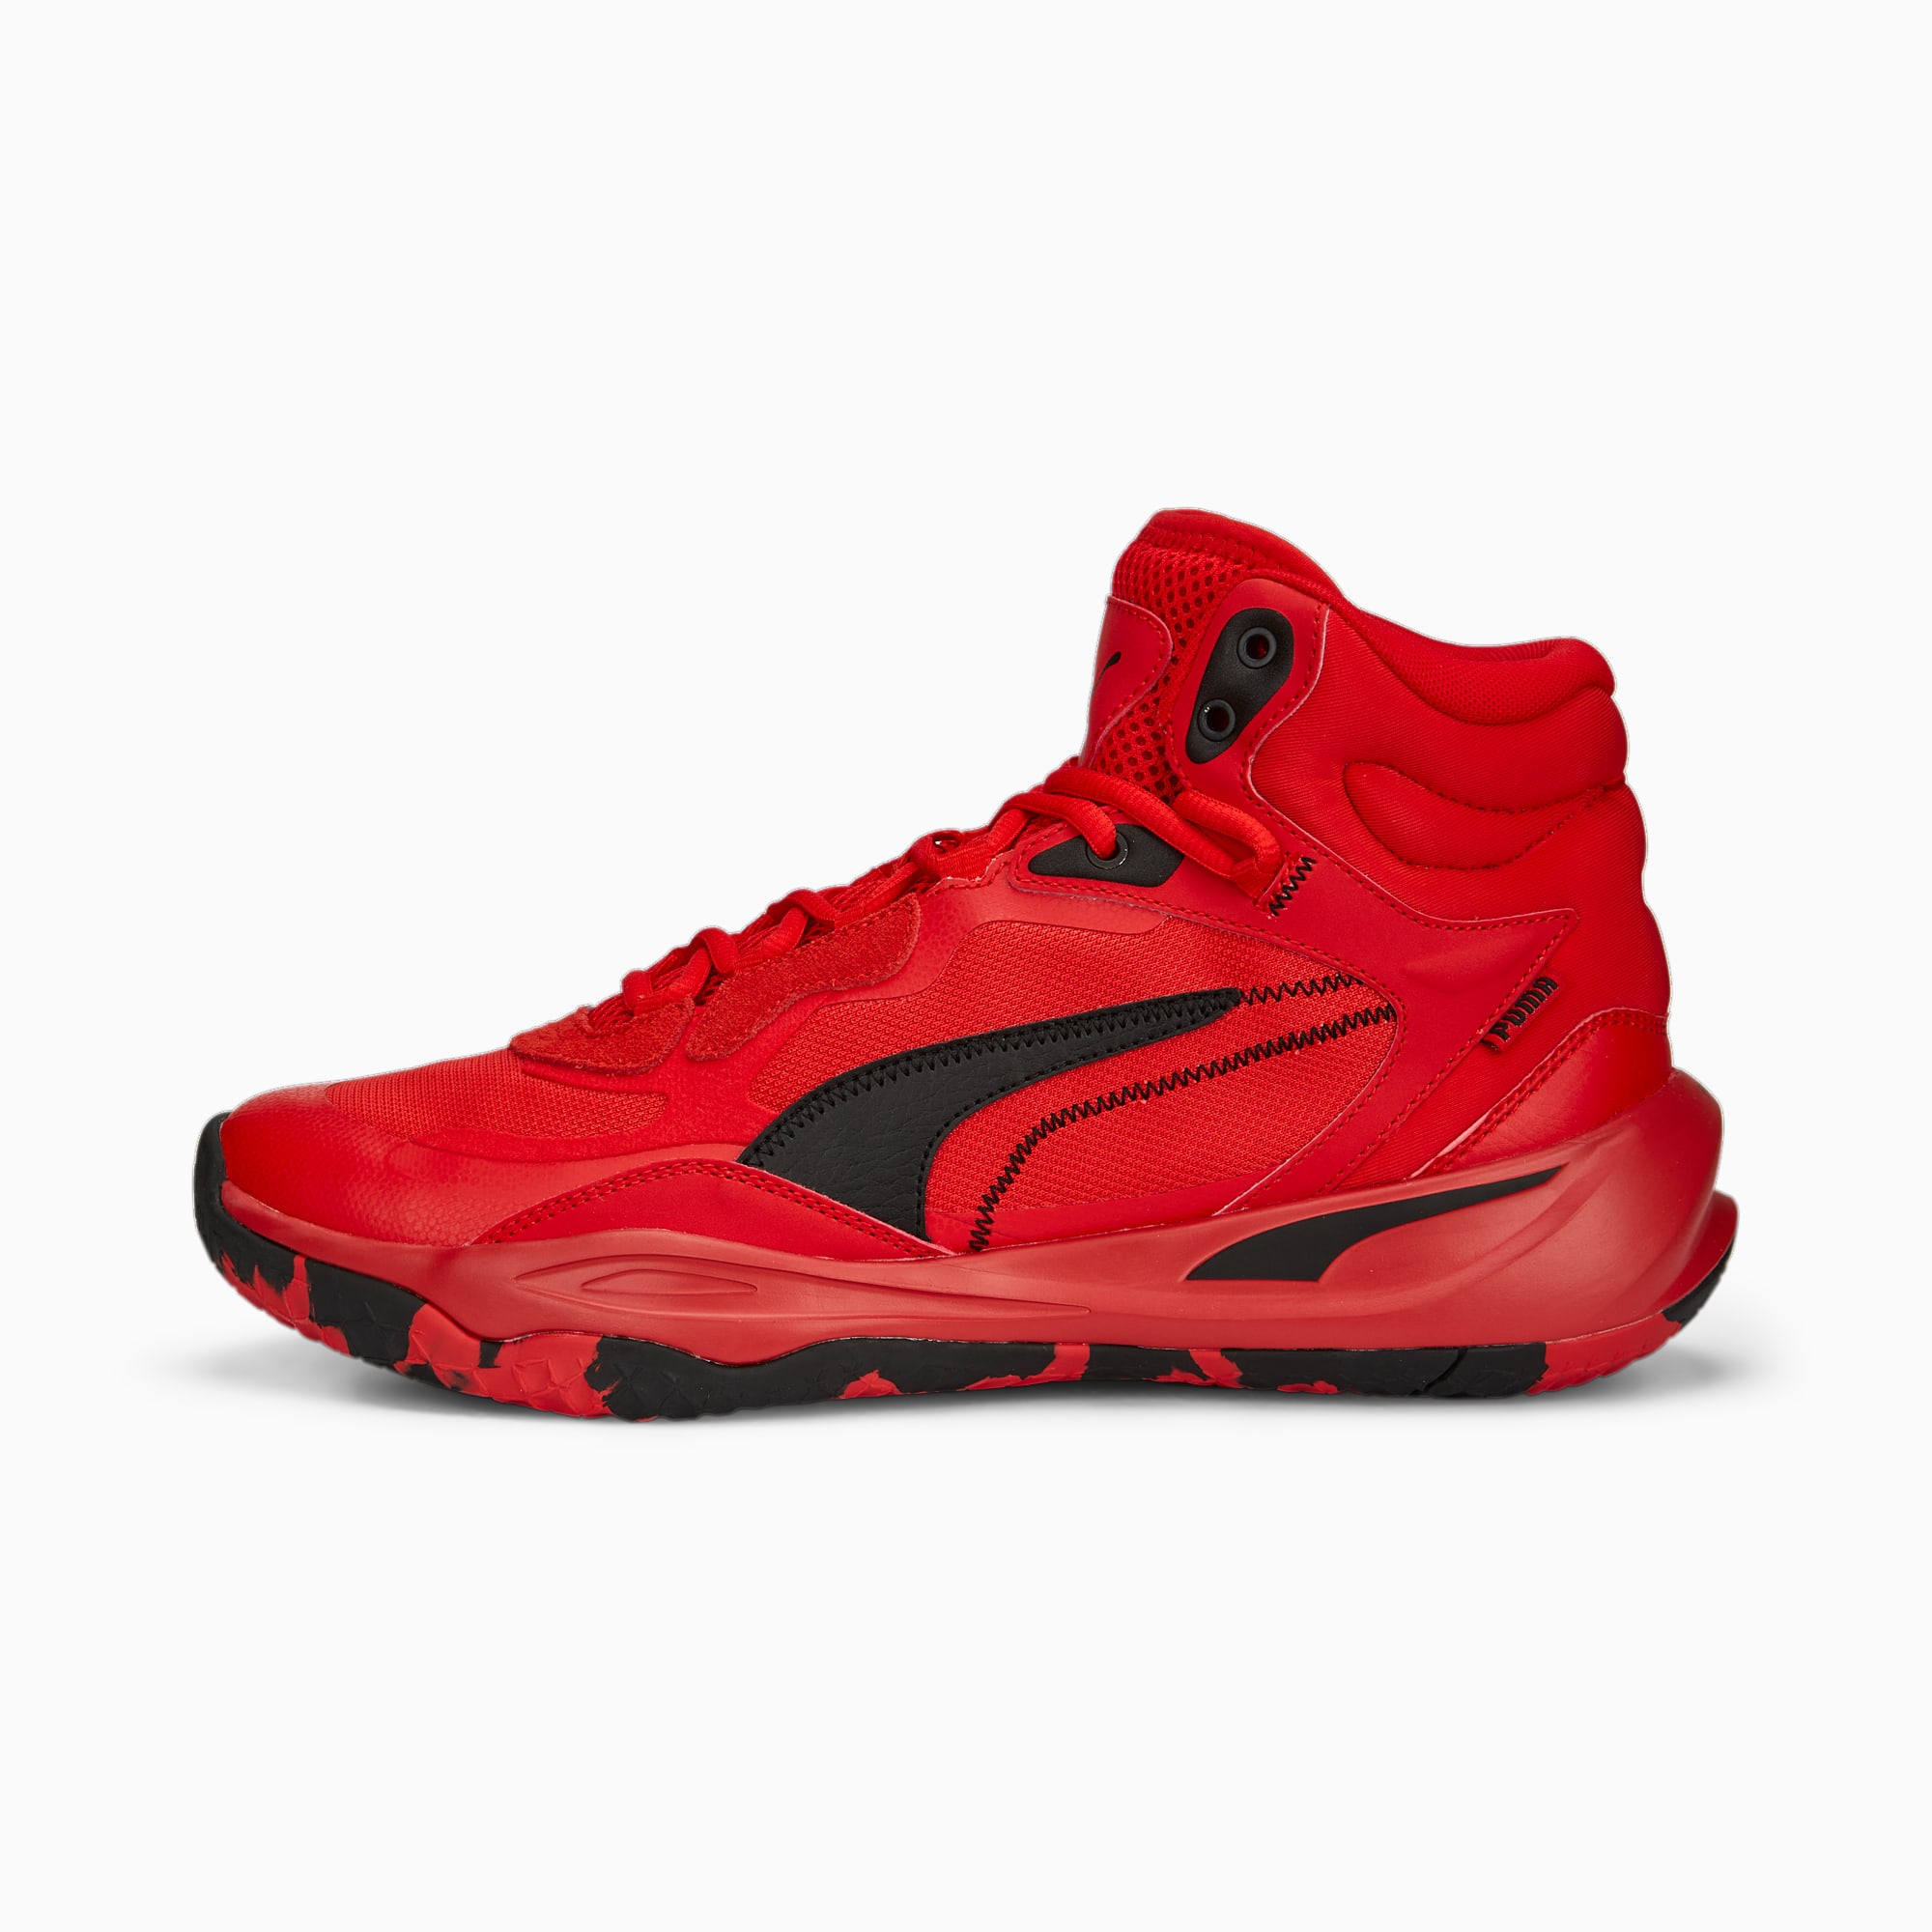 Playmaker Pro Mid Unisex Basketball Shoes | For All Time Red-PUMA Black ...